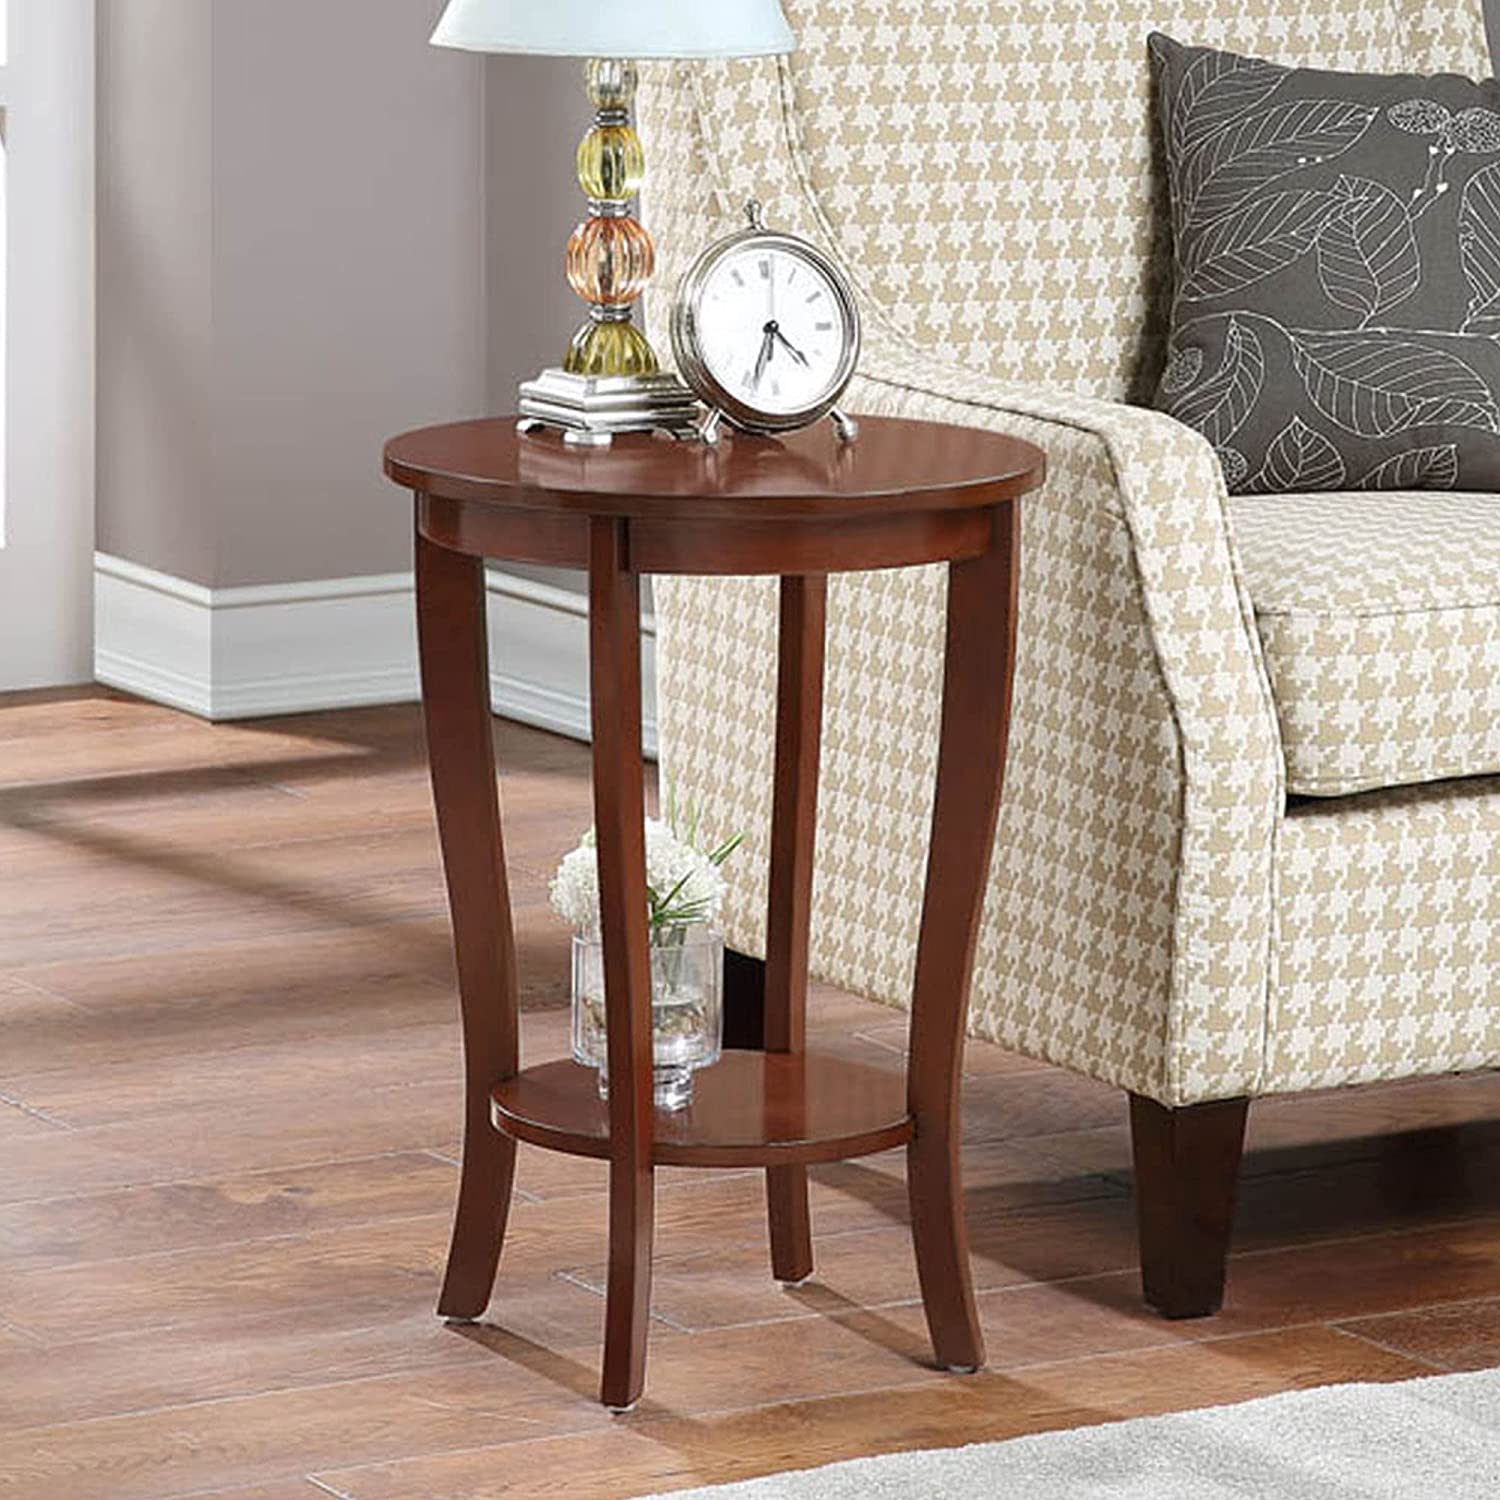 Convenience Concepts American Heritage Round End Table with Shelf, Espresso